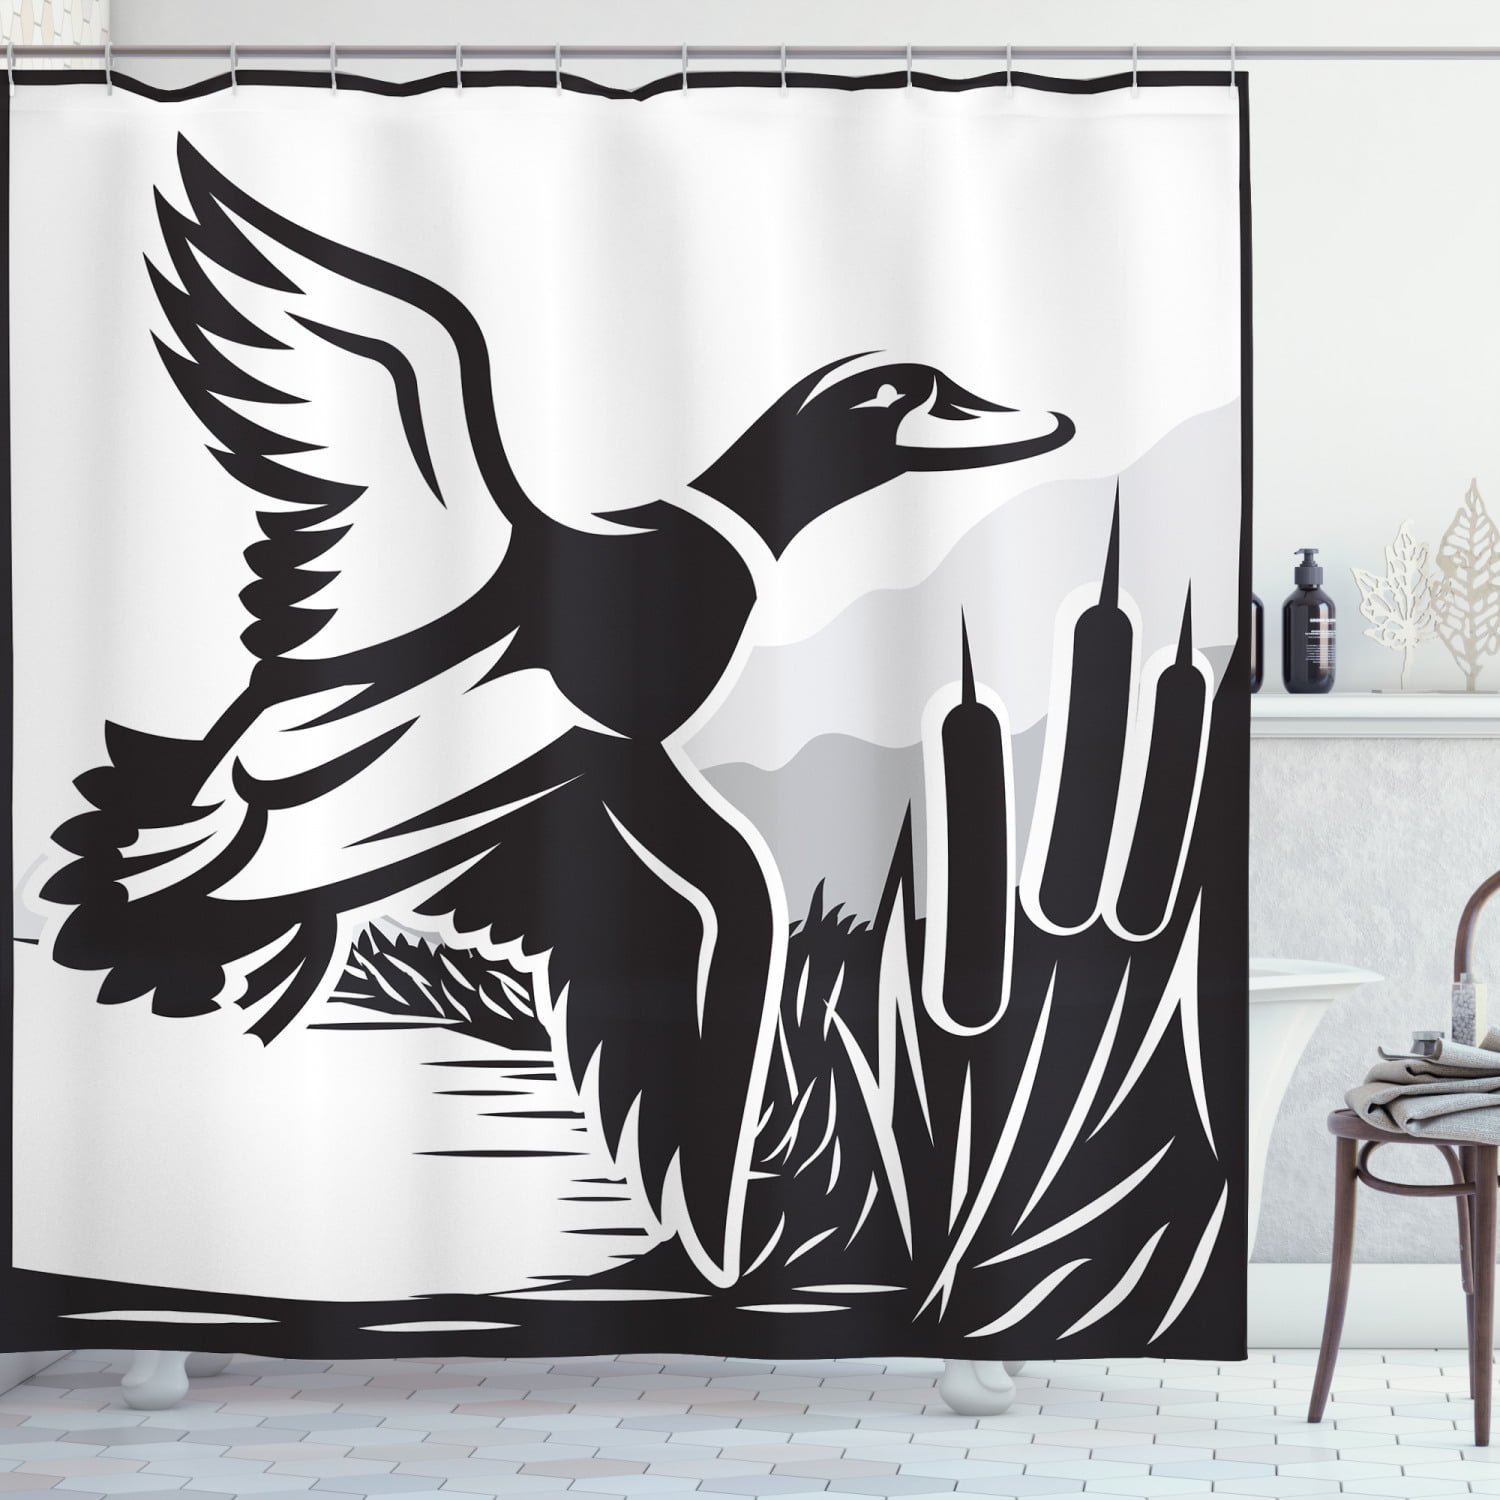 Duck Hunting Shower Curtain Bold, Duck Hunting Shower Curtain